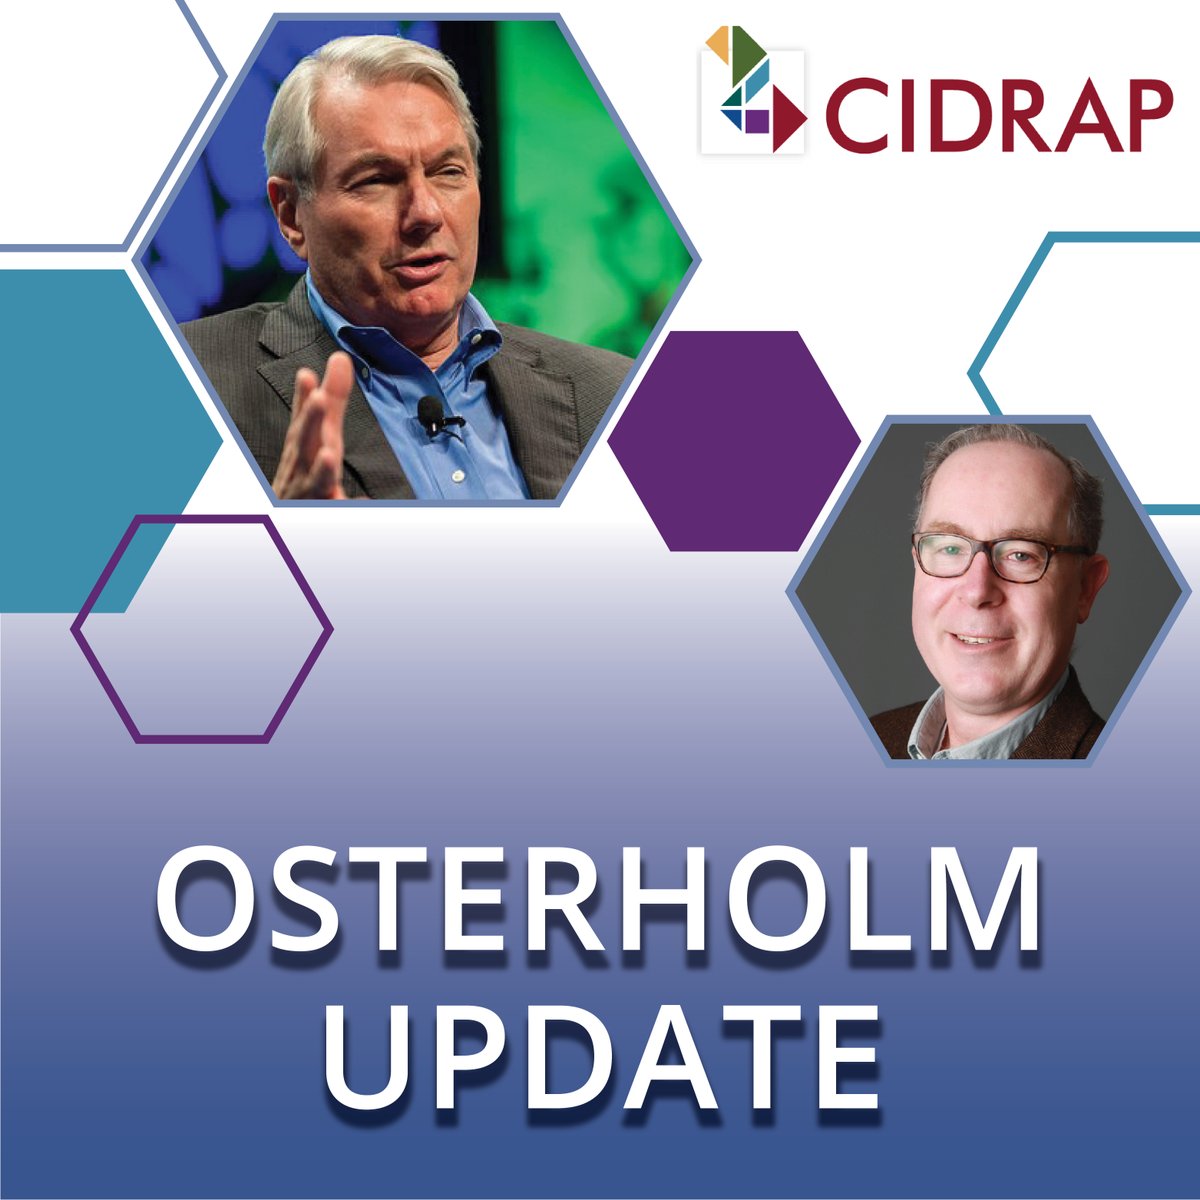 New 'Osterholm Update' podcast episode! @mtosterholm & @cvdall discuss the spread of H5N1 avian flu in cows, #COVID19 trends, long COVID, the safety of raw milk & dairy products, & 'This Week in Public Health History.' Plus podcast team interviews! cidrap.umn.edu/covid-19/episo…